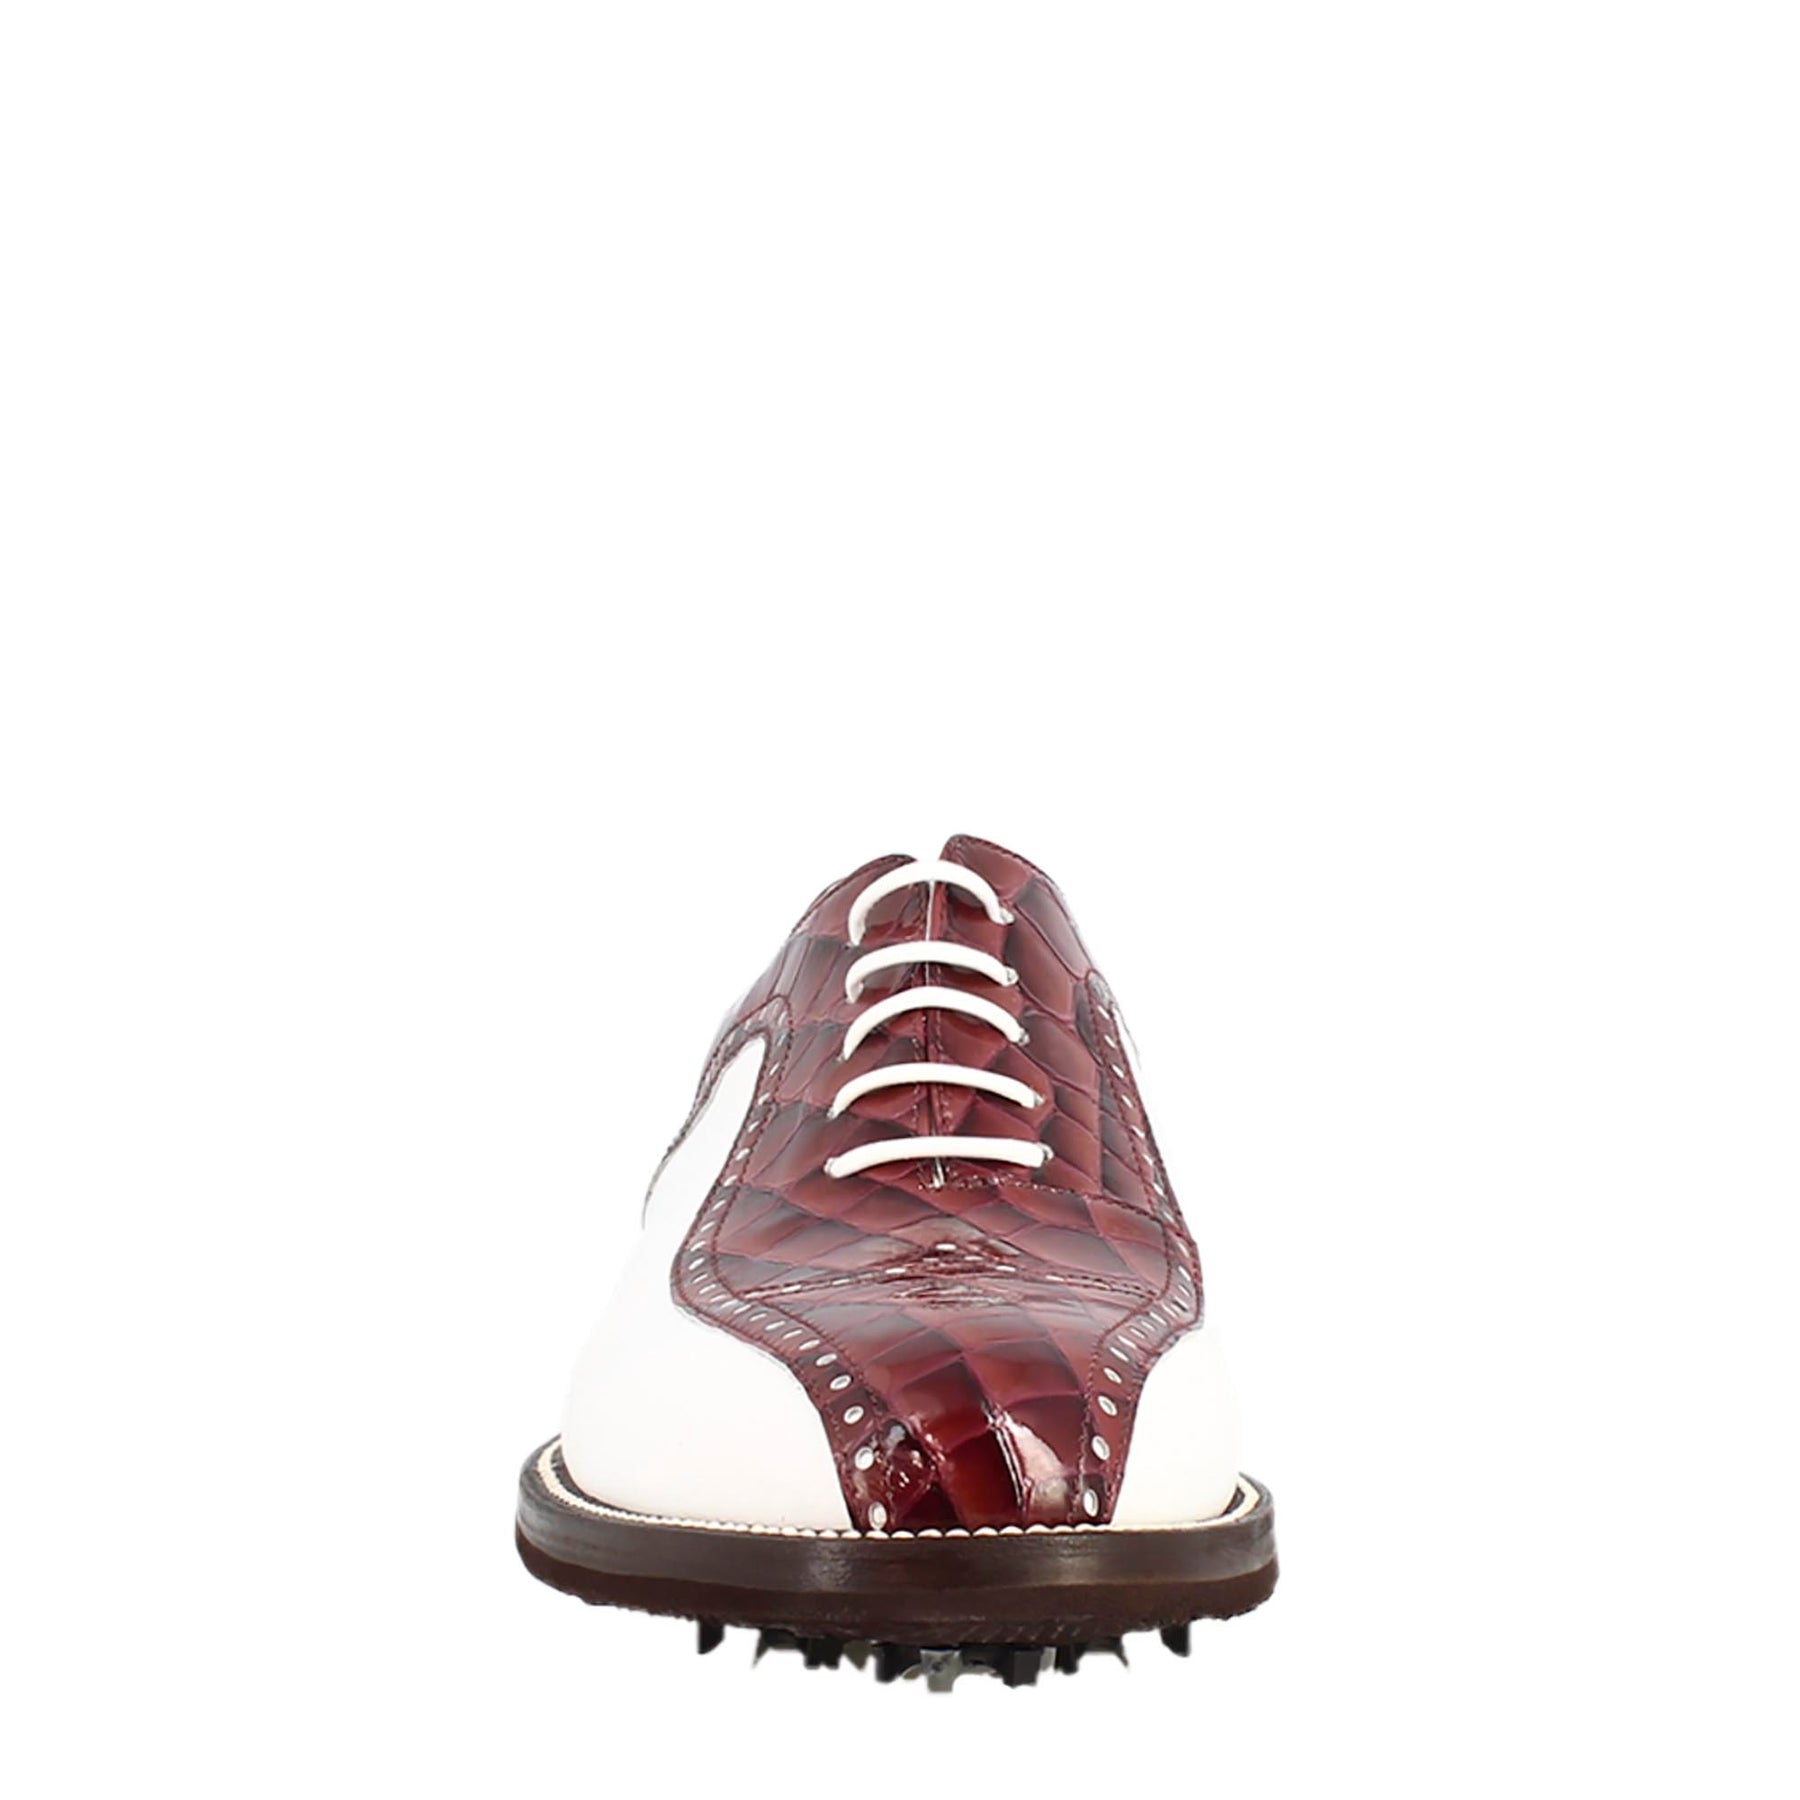 Handmade women's golf shoes in white crocodile and bordeaux full-grain leather